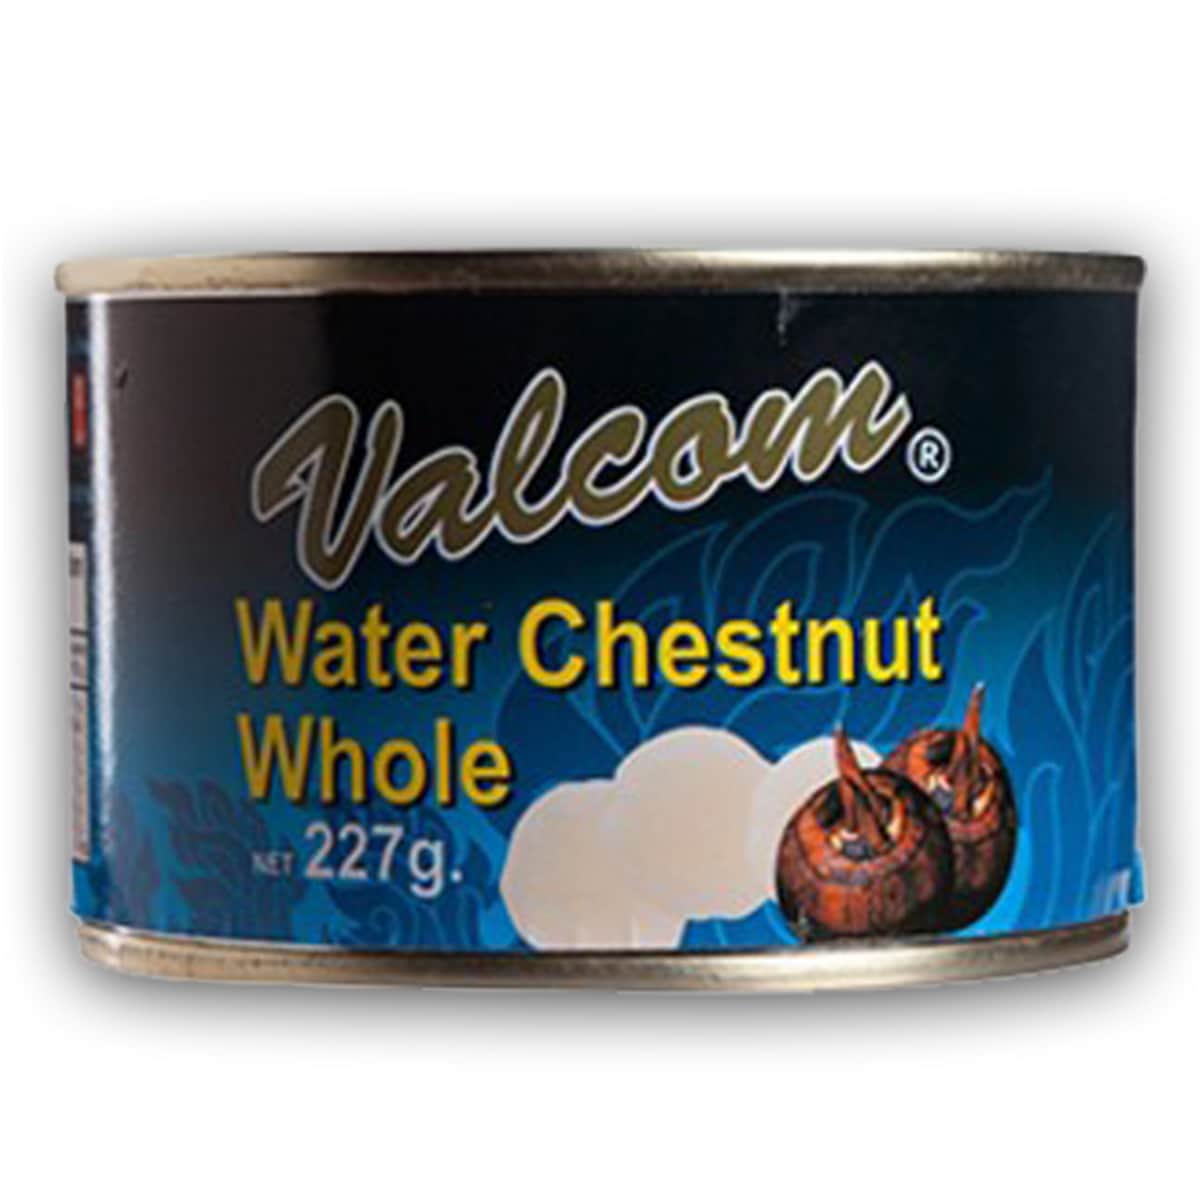 Water Chestnut Whole - 227 gm